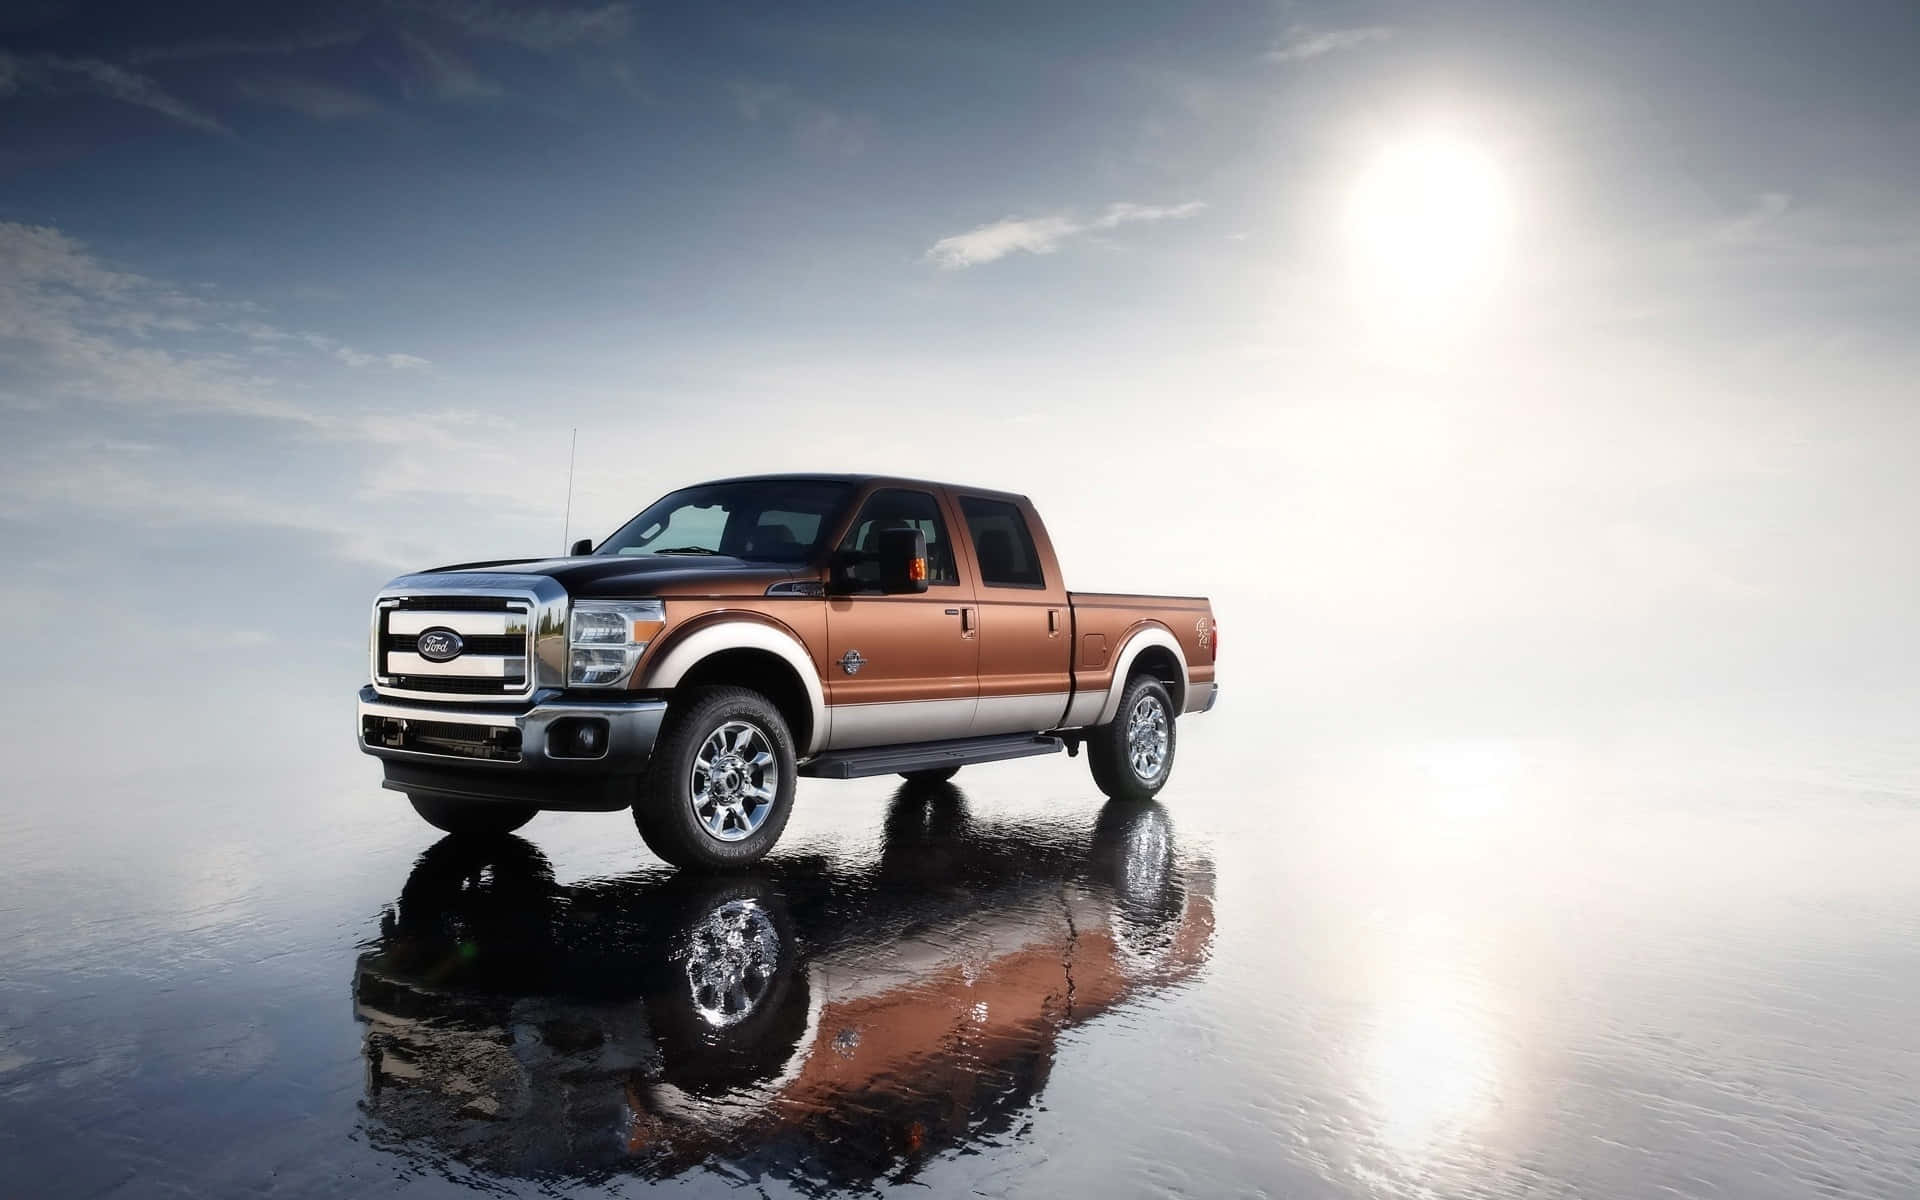 The Ford Super Duty F-250 Is Parked On A Rocky Surface